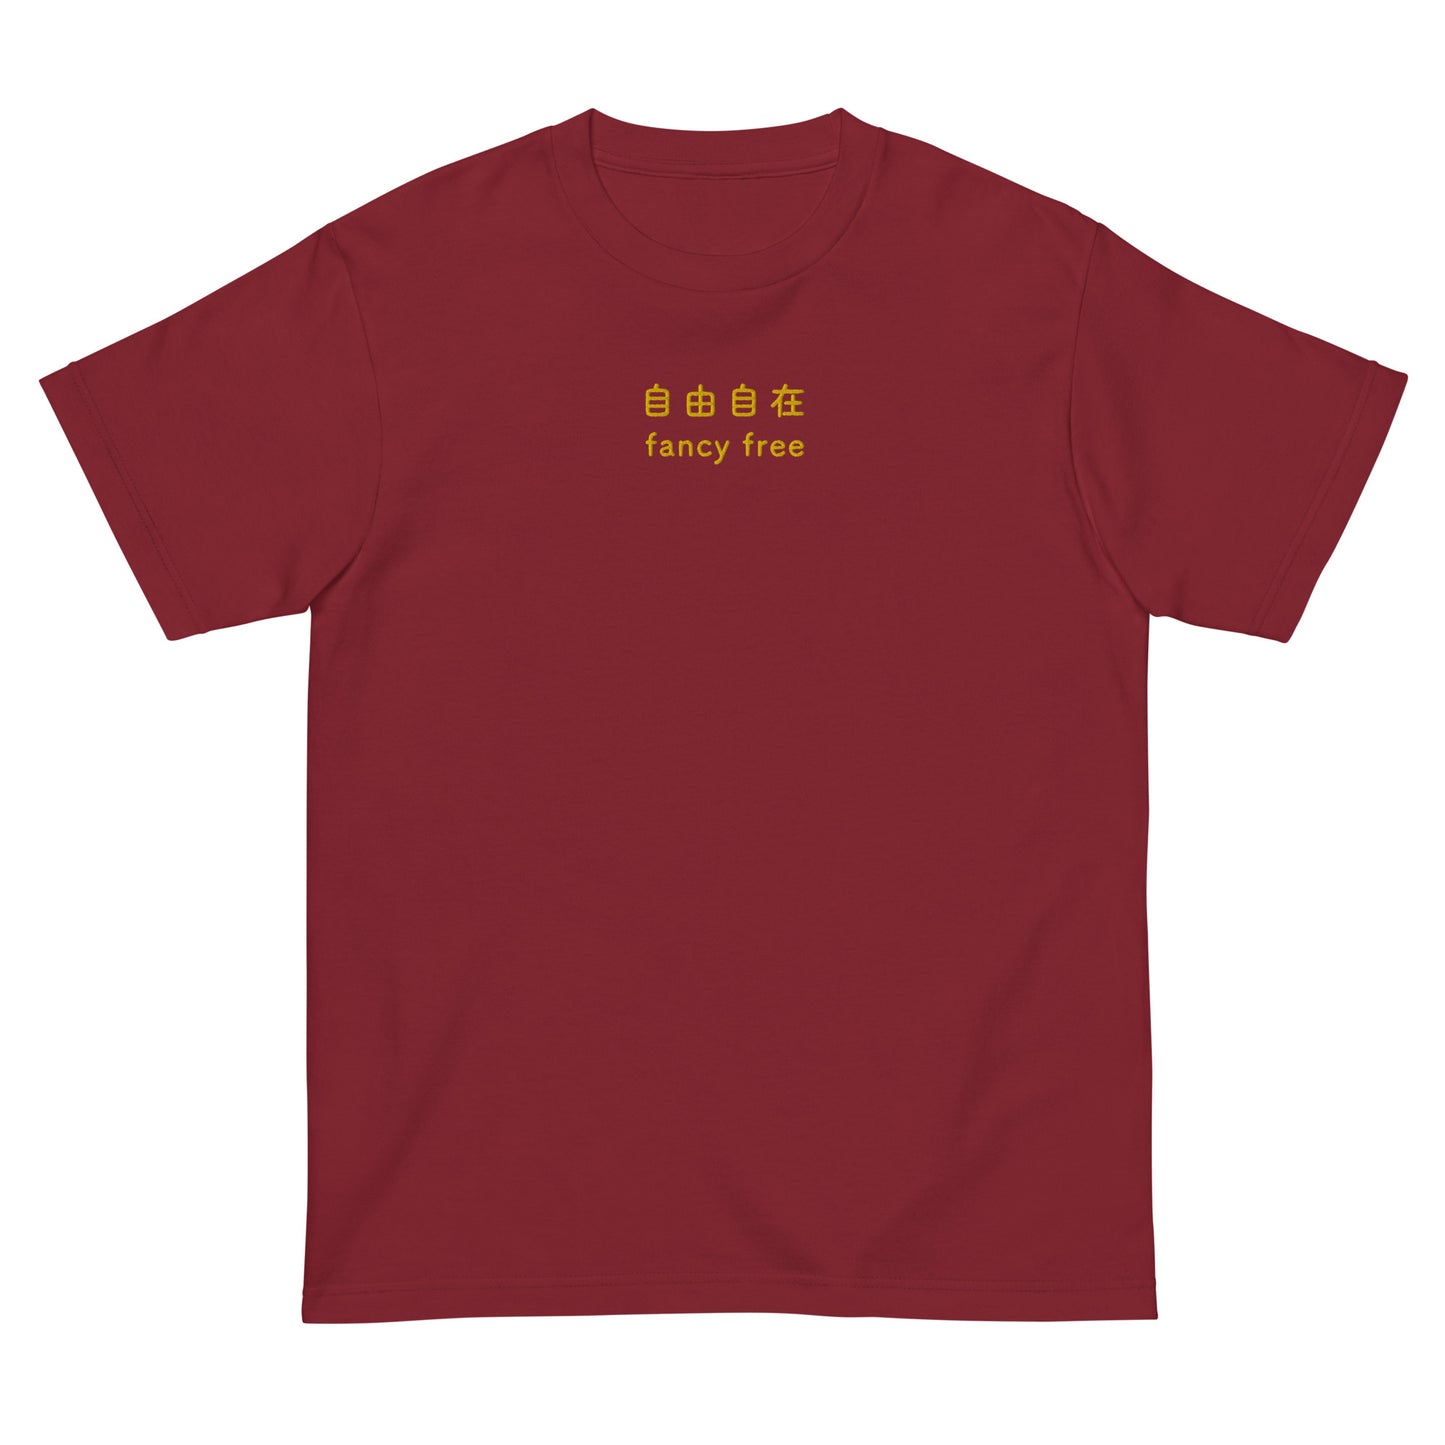 Red High Quality Tee - Front Design with an Yellow Embroidery "Fancy Free" in Japanese,Chinese and English